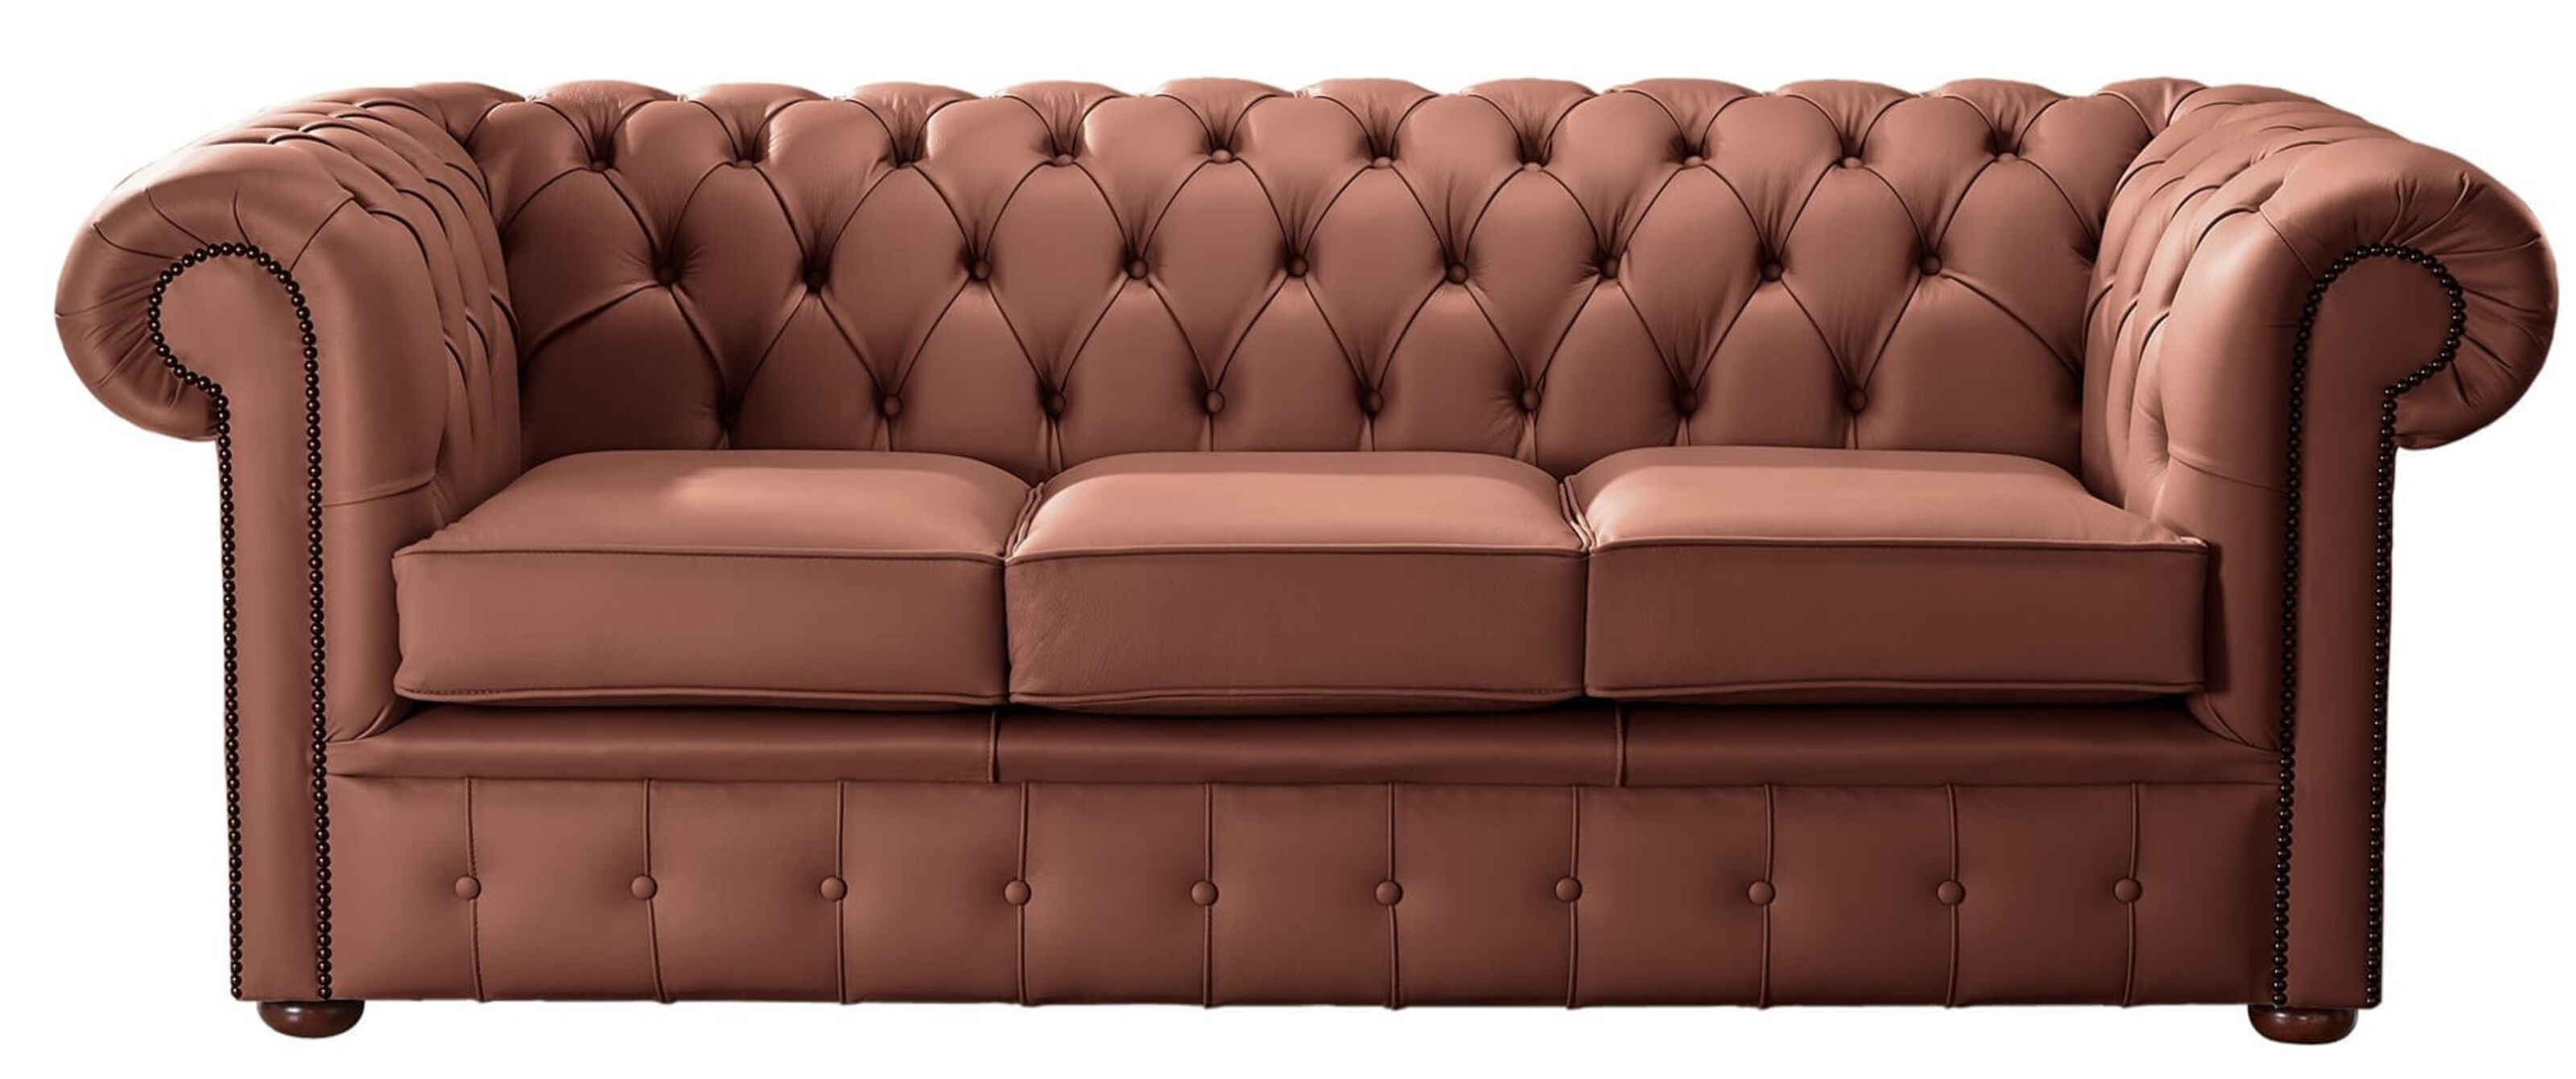 Looking for Affordable Sofas? Let's Find Your Dream Sofa  %Post Title